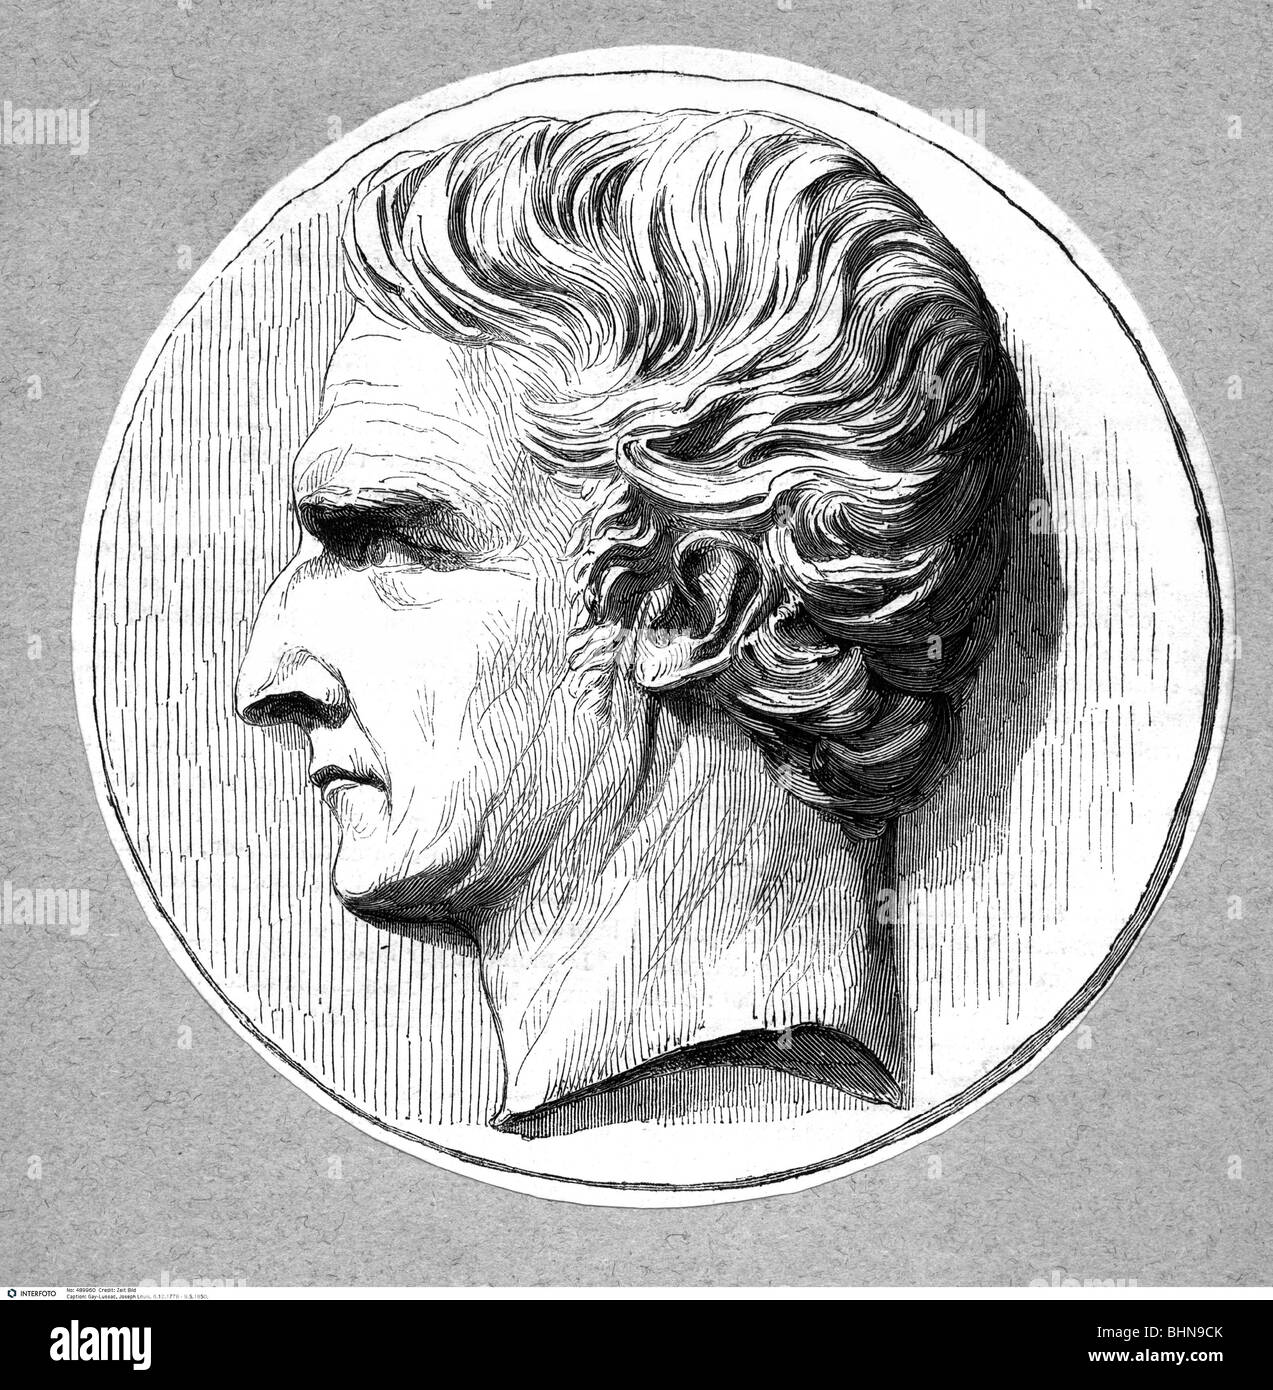 Gay-Lussac, Joseph Louis, 6.12.1778 - 9.5.1850, French chemist and physicist, portrait, wood engraving after a locket by David d'Angers, 19th century, Stock Photo